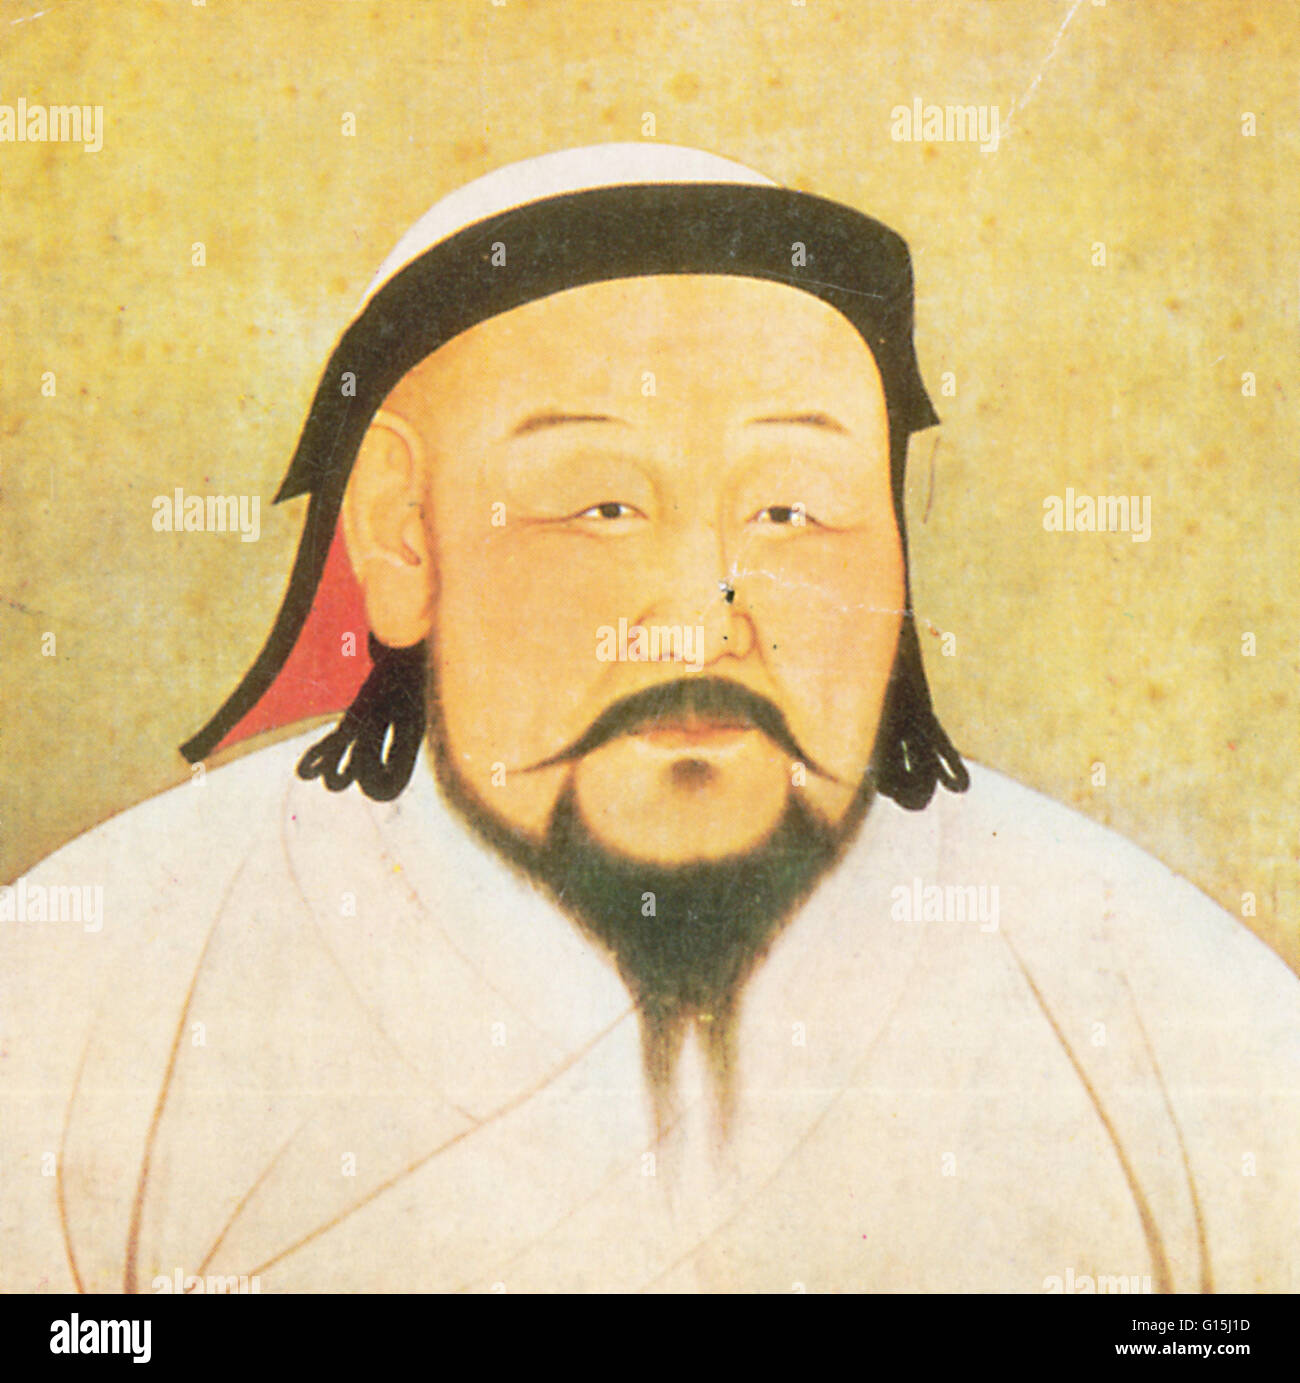 Kublai Khan (1215-1294) was a Mongolian leader who made an impact on China, not only through conquest, but also by ruling successfully. Many of the rulers before him were brutally land-hungry and apathetic to the conquered people; however, Kublai challeng Stock Photo